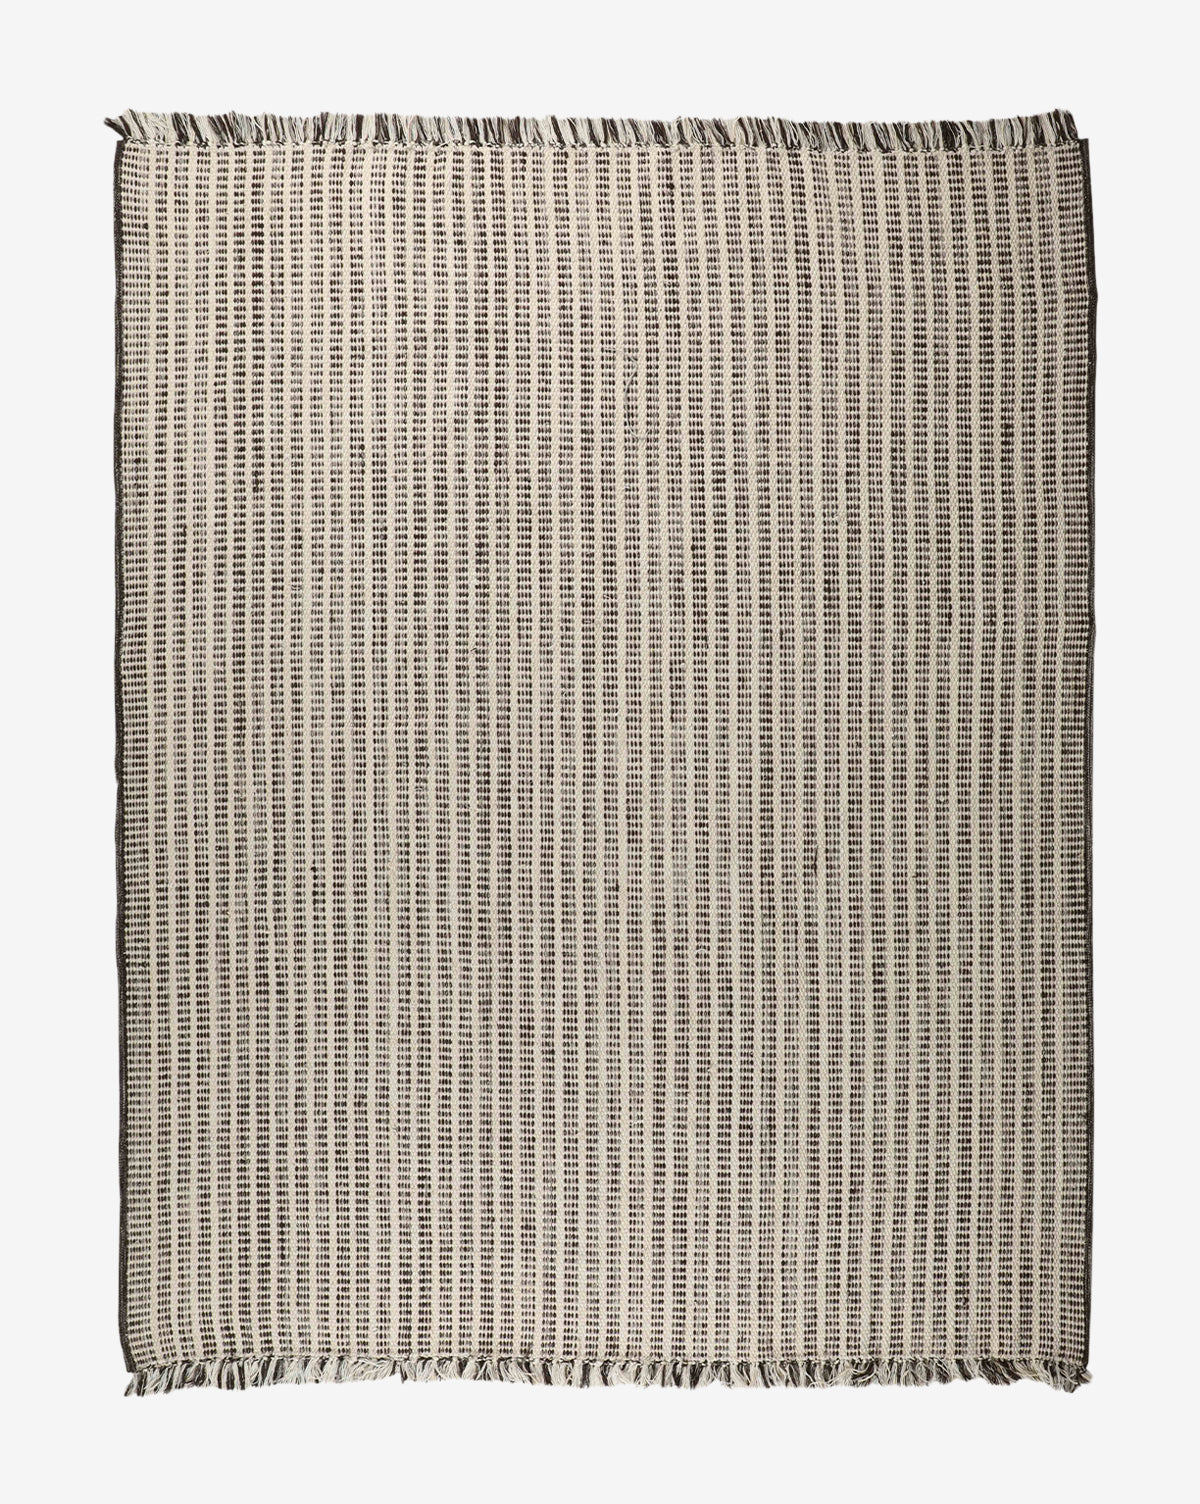 Obeetee, Lombardy Hand-Tufted Wool Rug